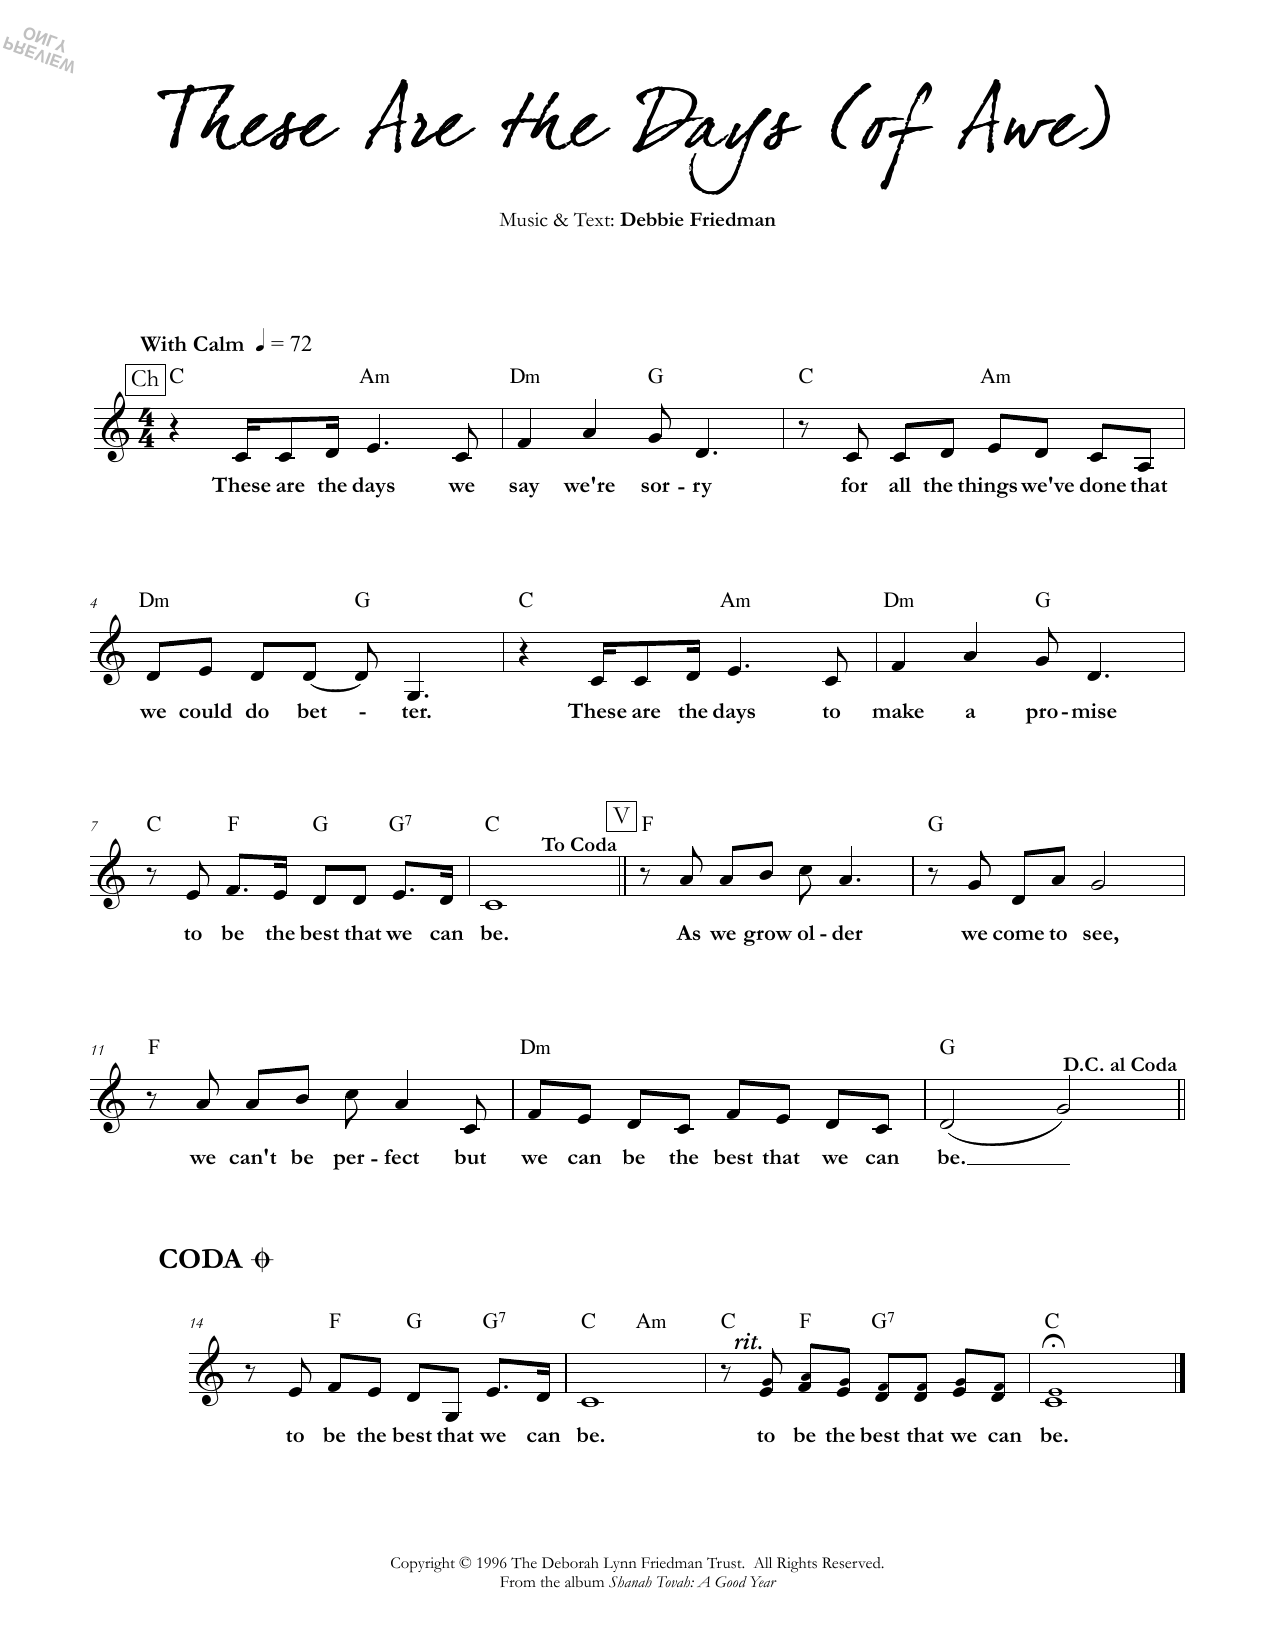 Download Debbie Friedman These are the Days (of Awe) Sheet Music